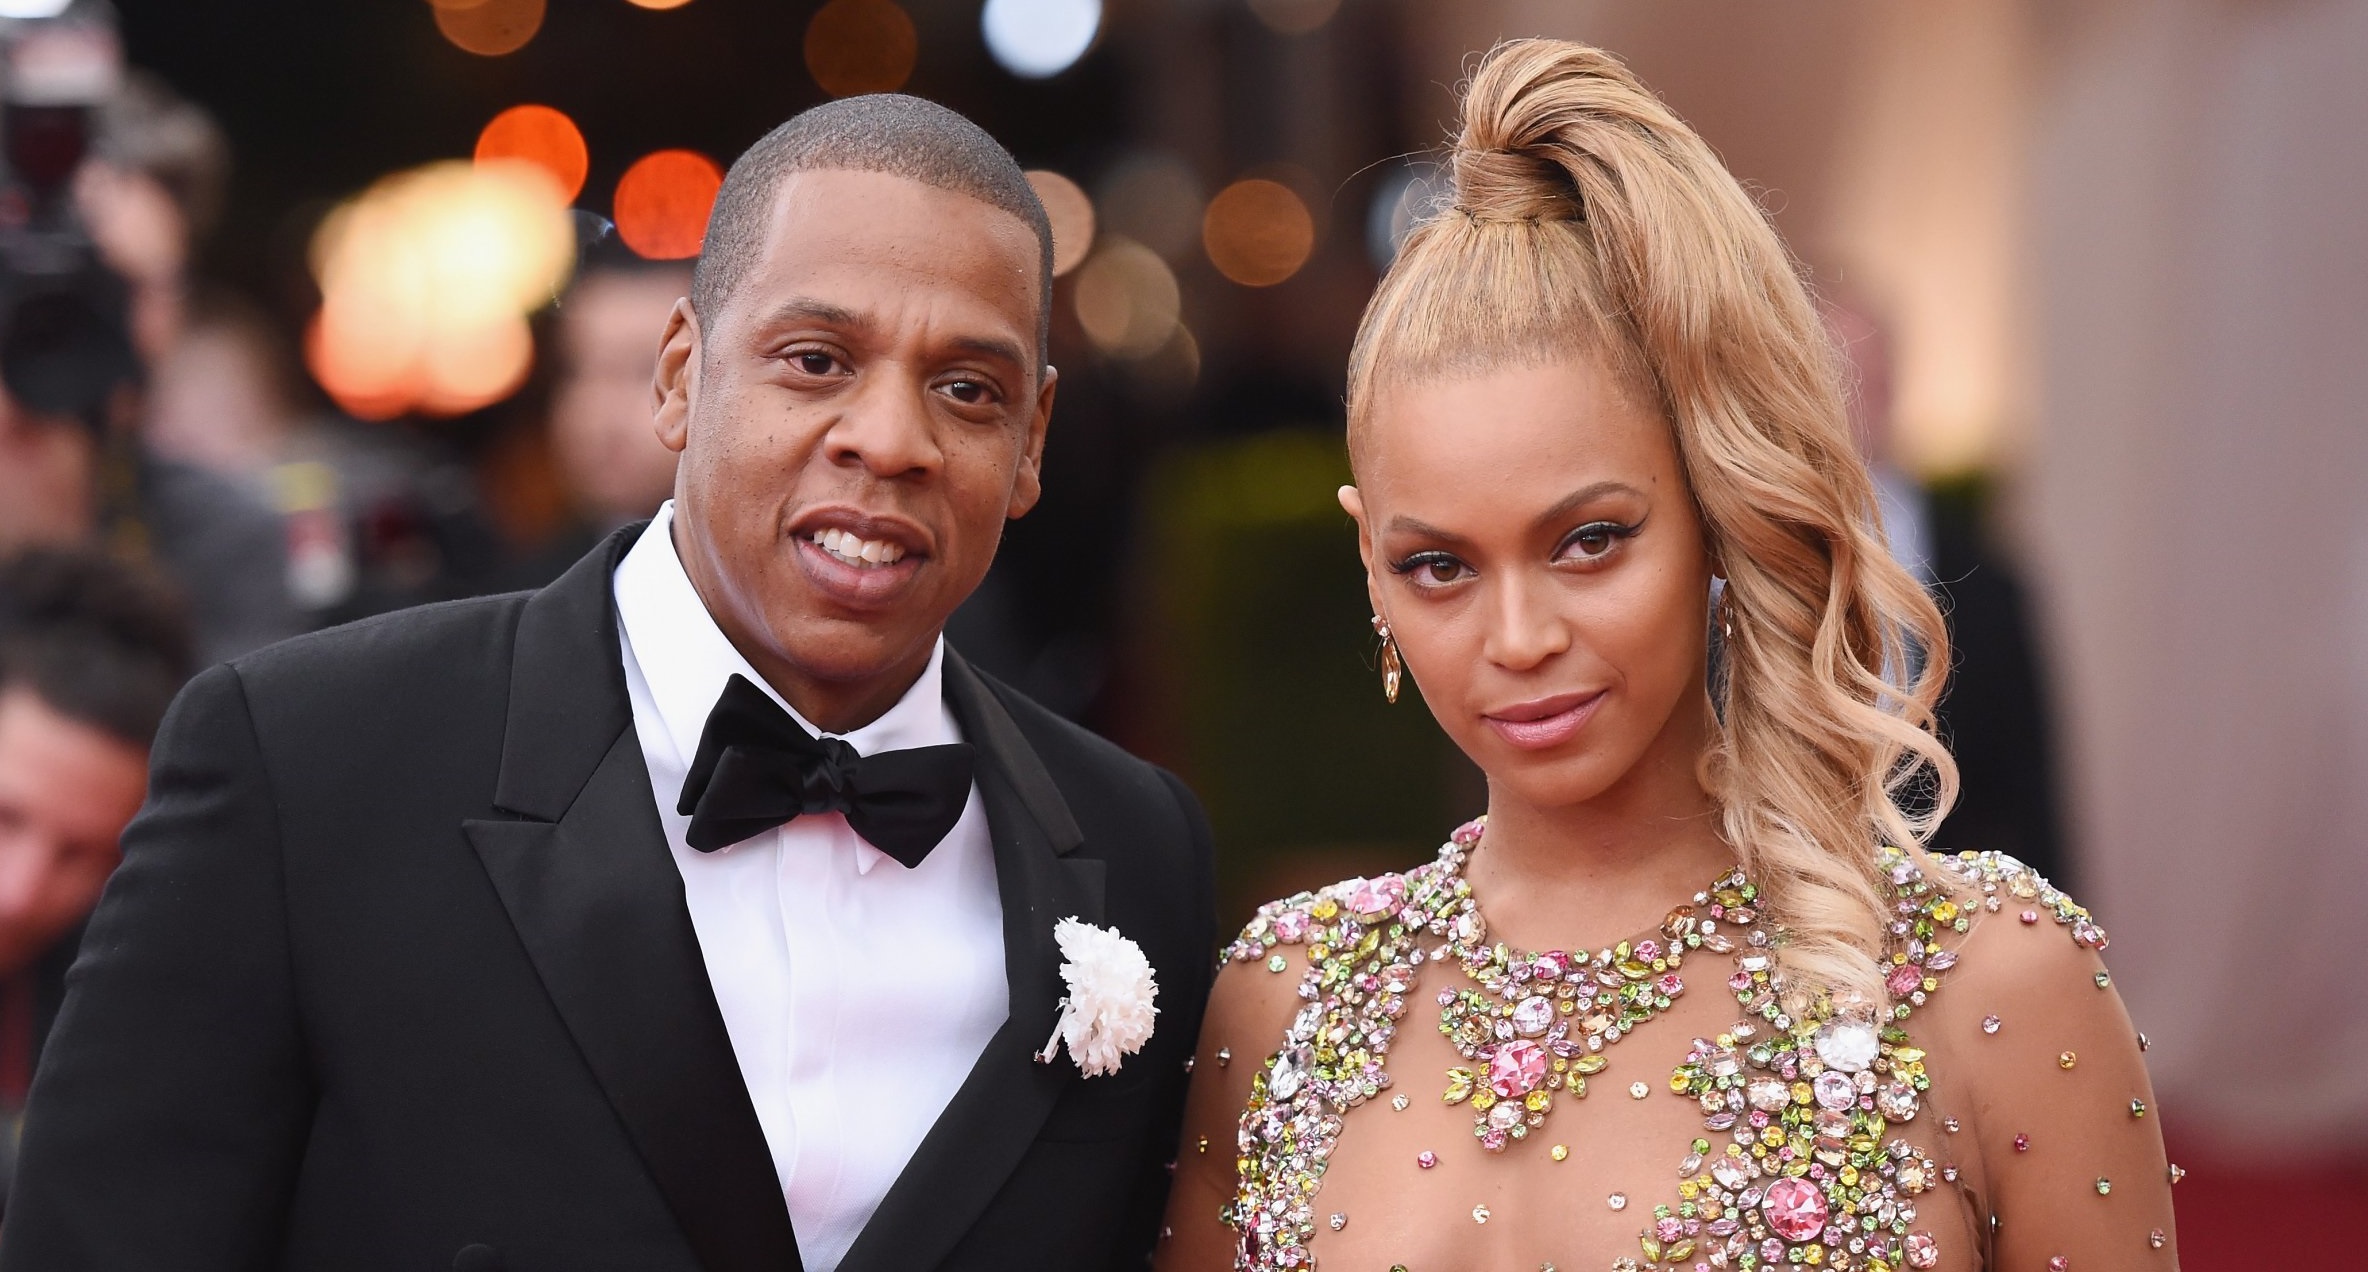 Jay Z Now Has 100 Hot 100 Entries To His Name, With This New Song…